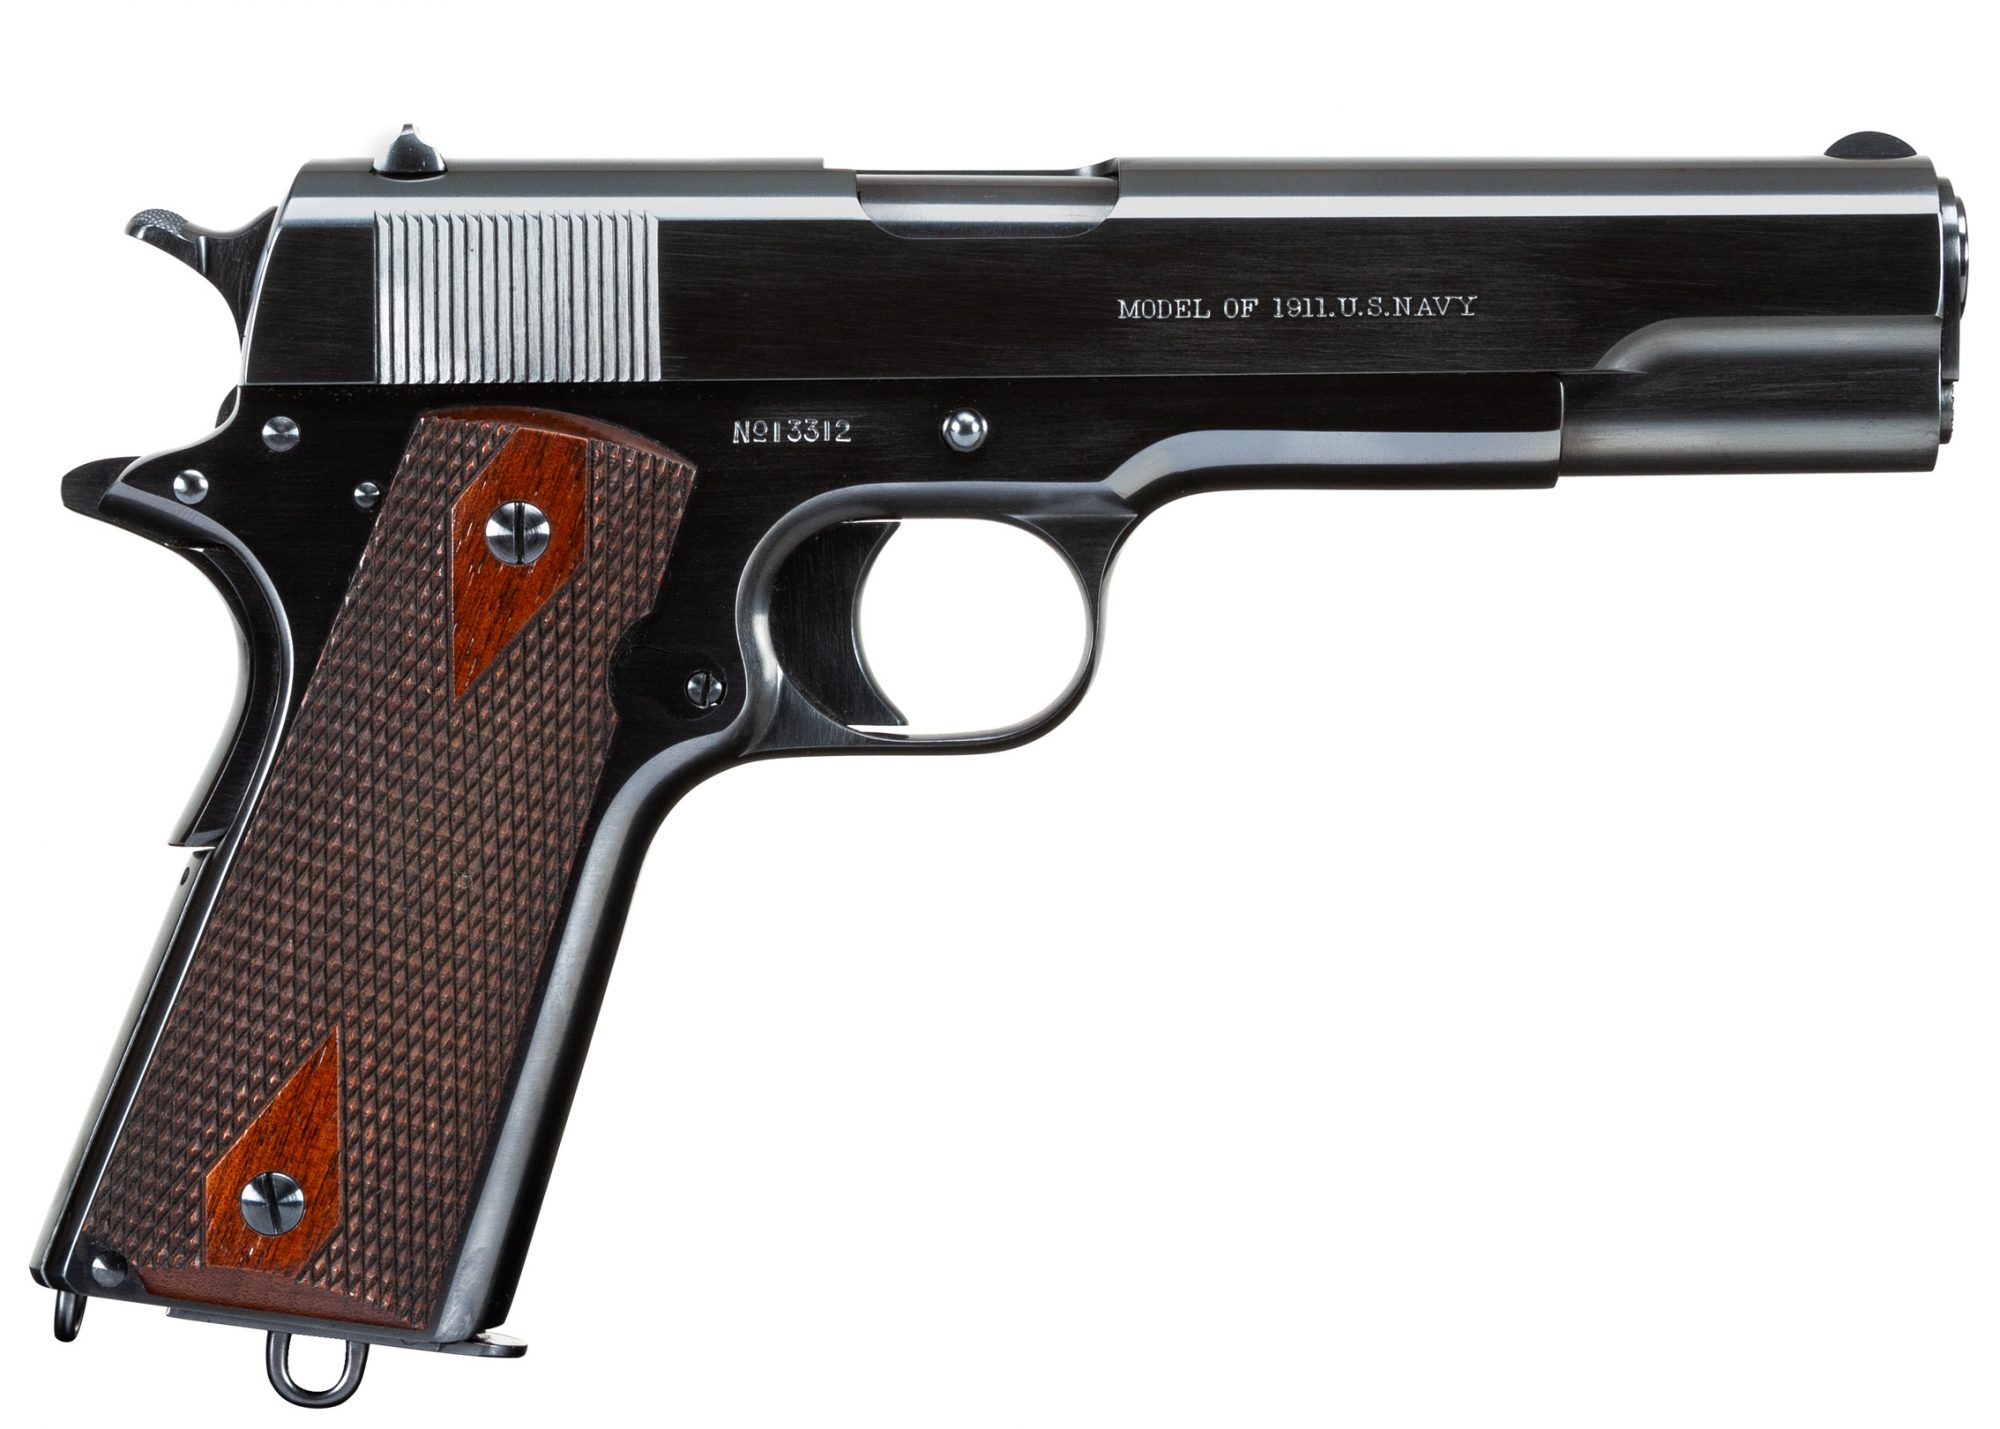 Colt 1911 U.S. Navy from 1912 restored by Steve Moeller and charcoal blued by Turnbull Restoration